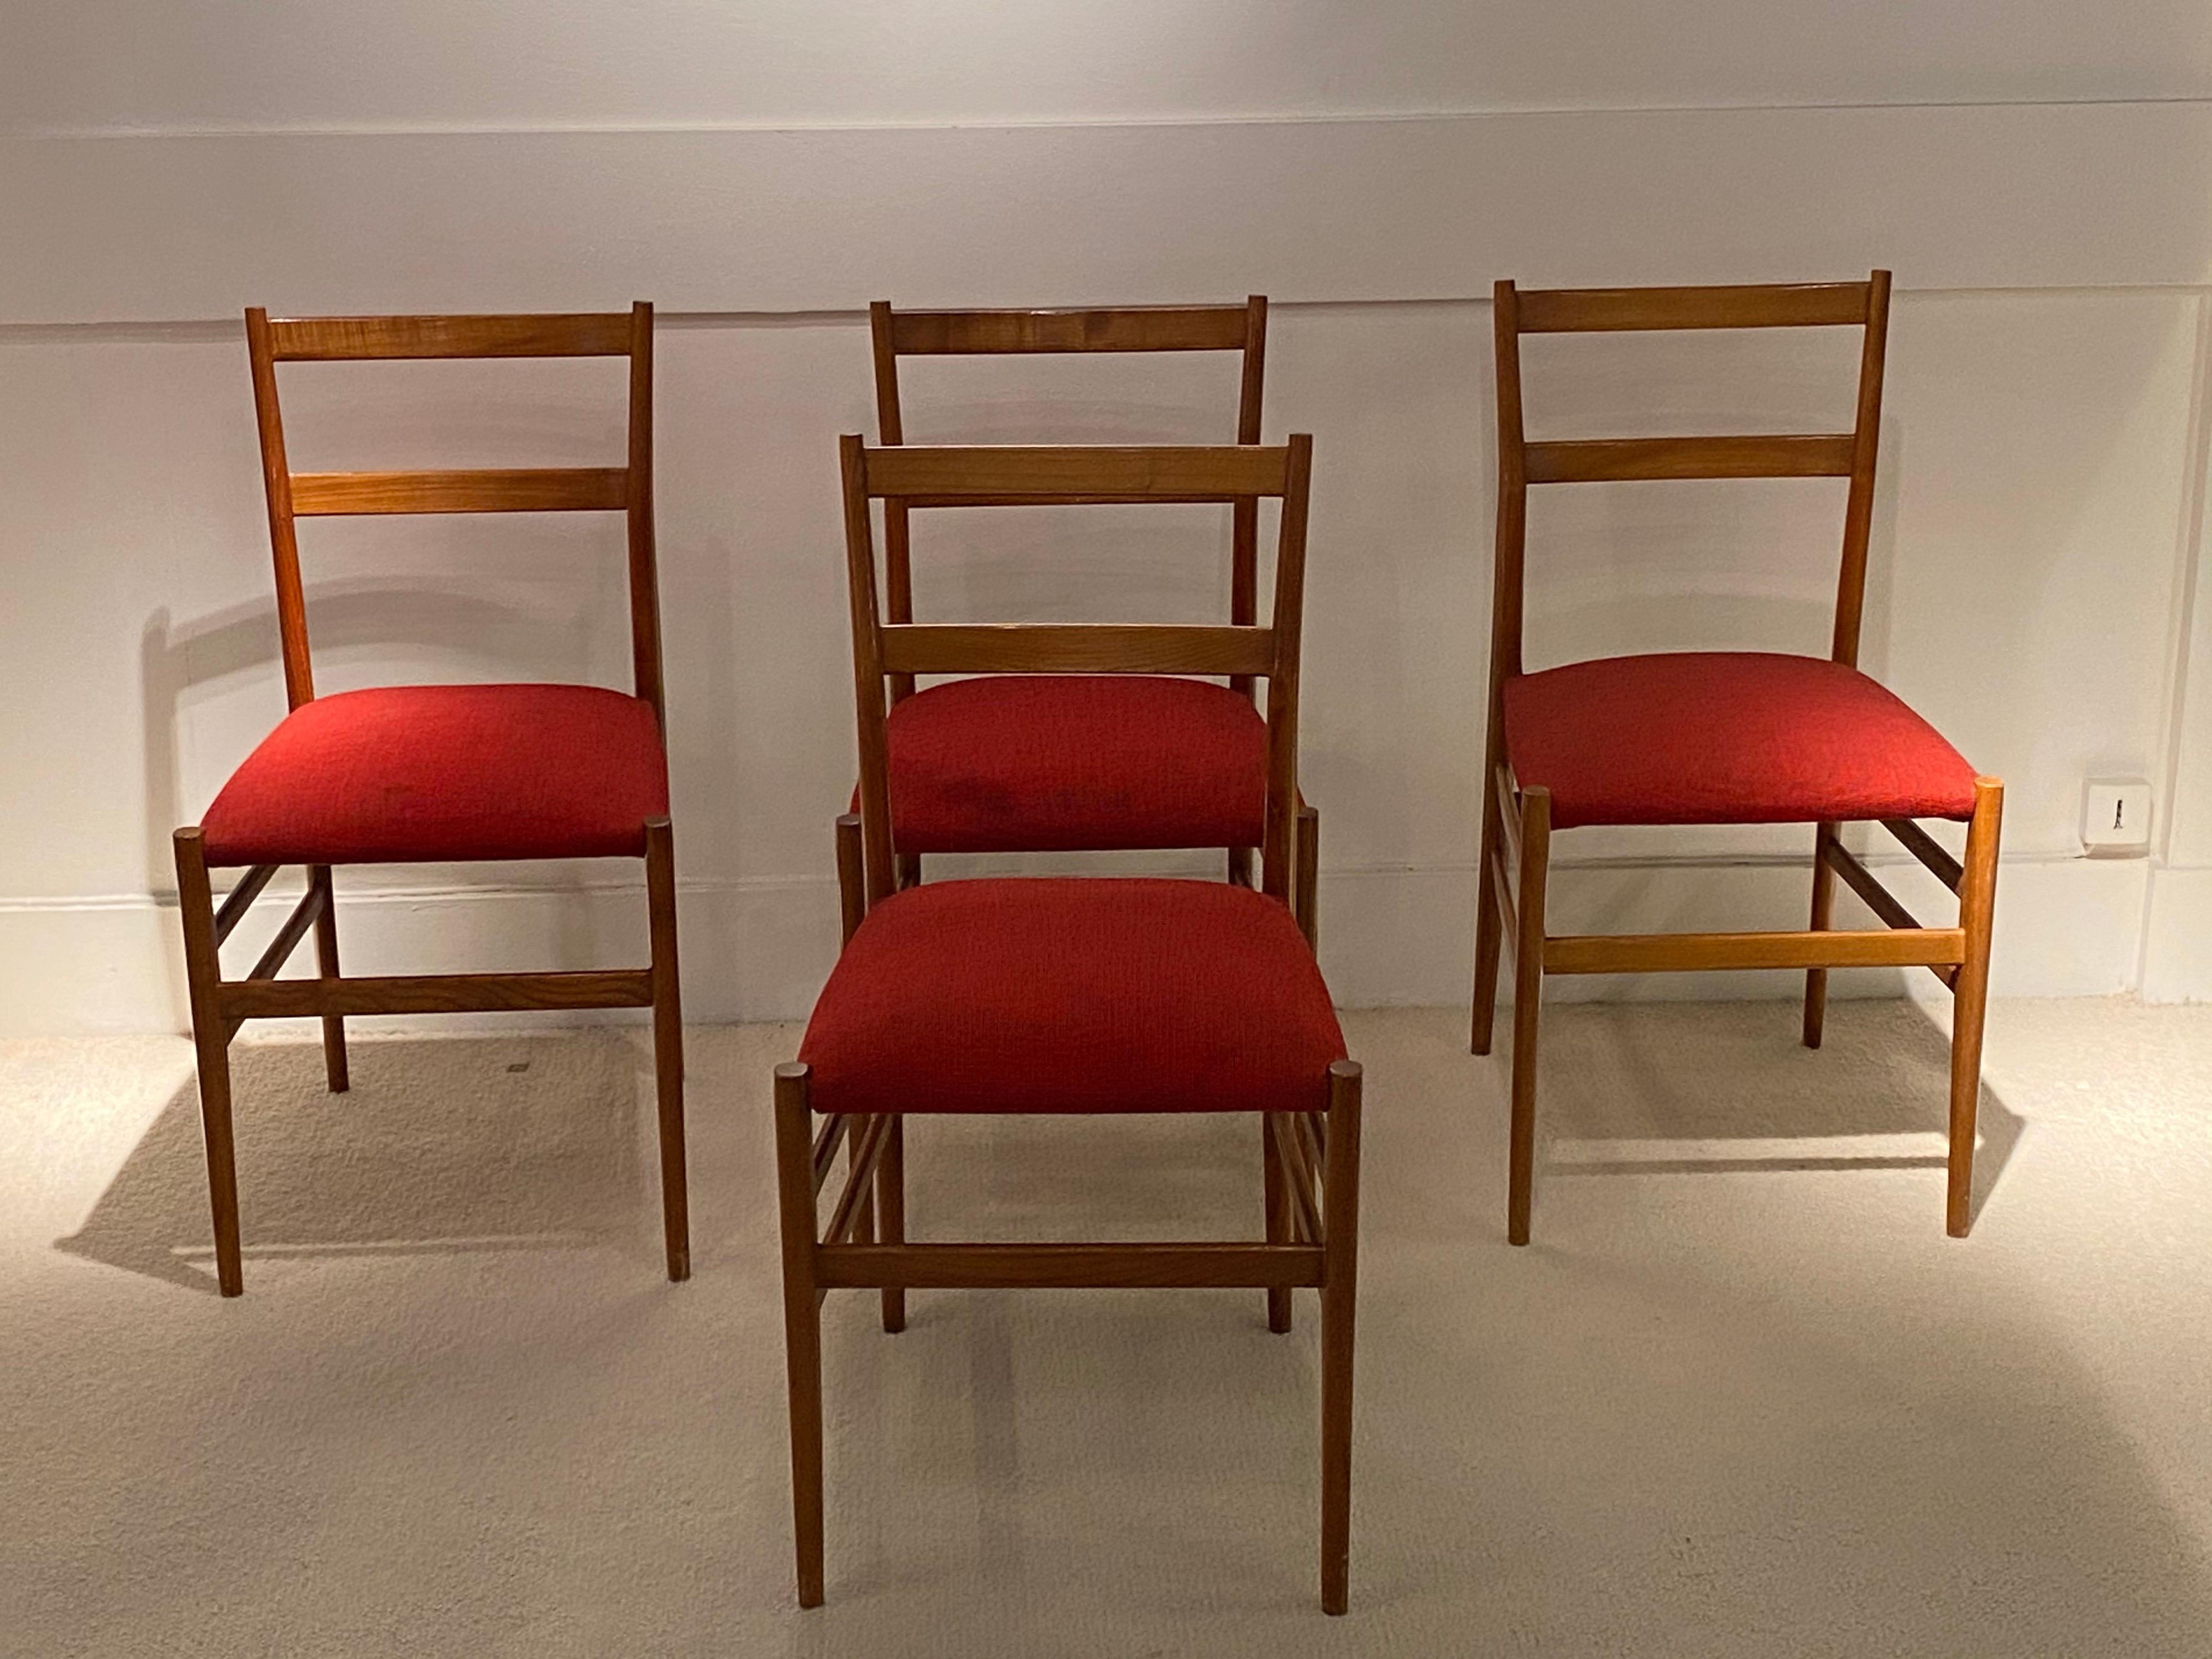 4 legera chairs by Gio Ponti, circa 1950
Edition Figli di Amadeo Casinna
Fabric has some stains.